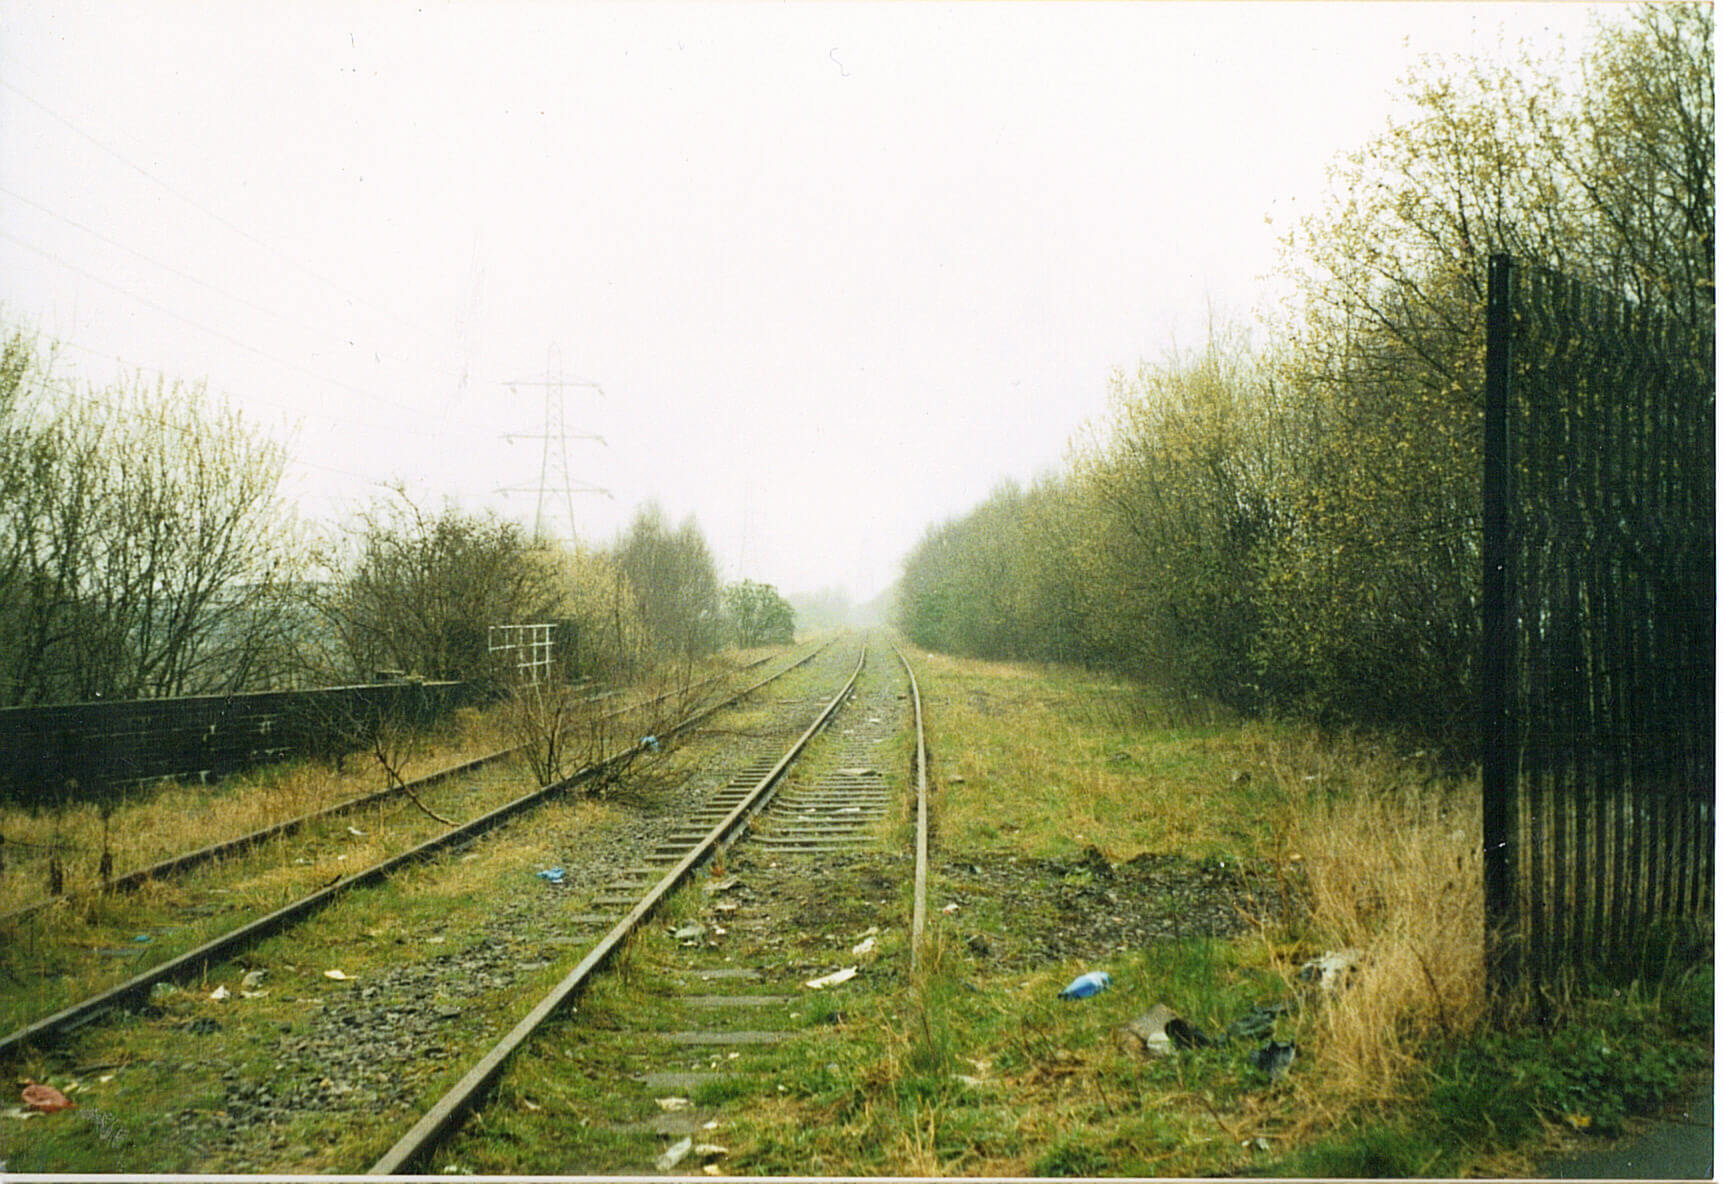 A railroad track covered by overgrown grass